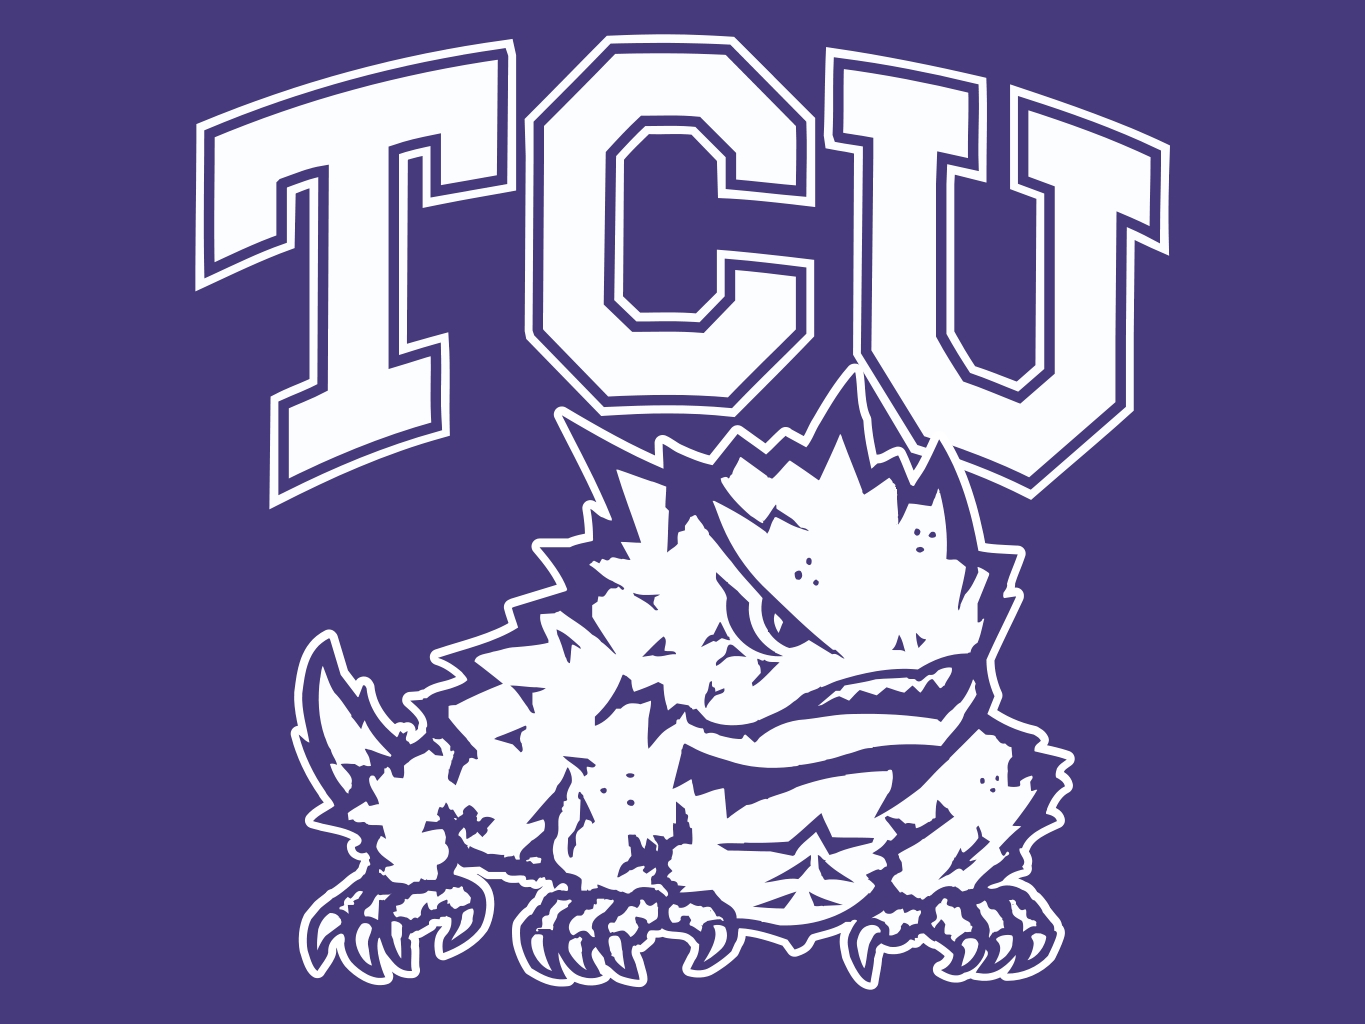 Buy TCU Horned Frogs Tickets Today